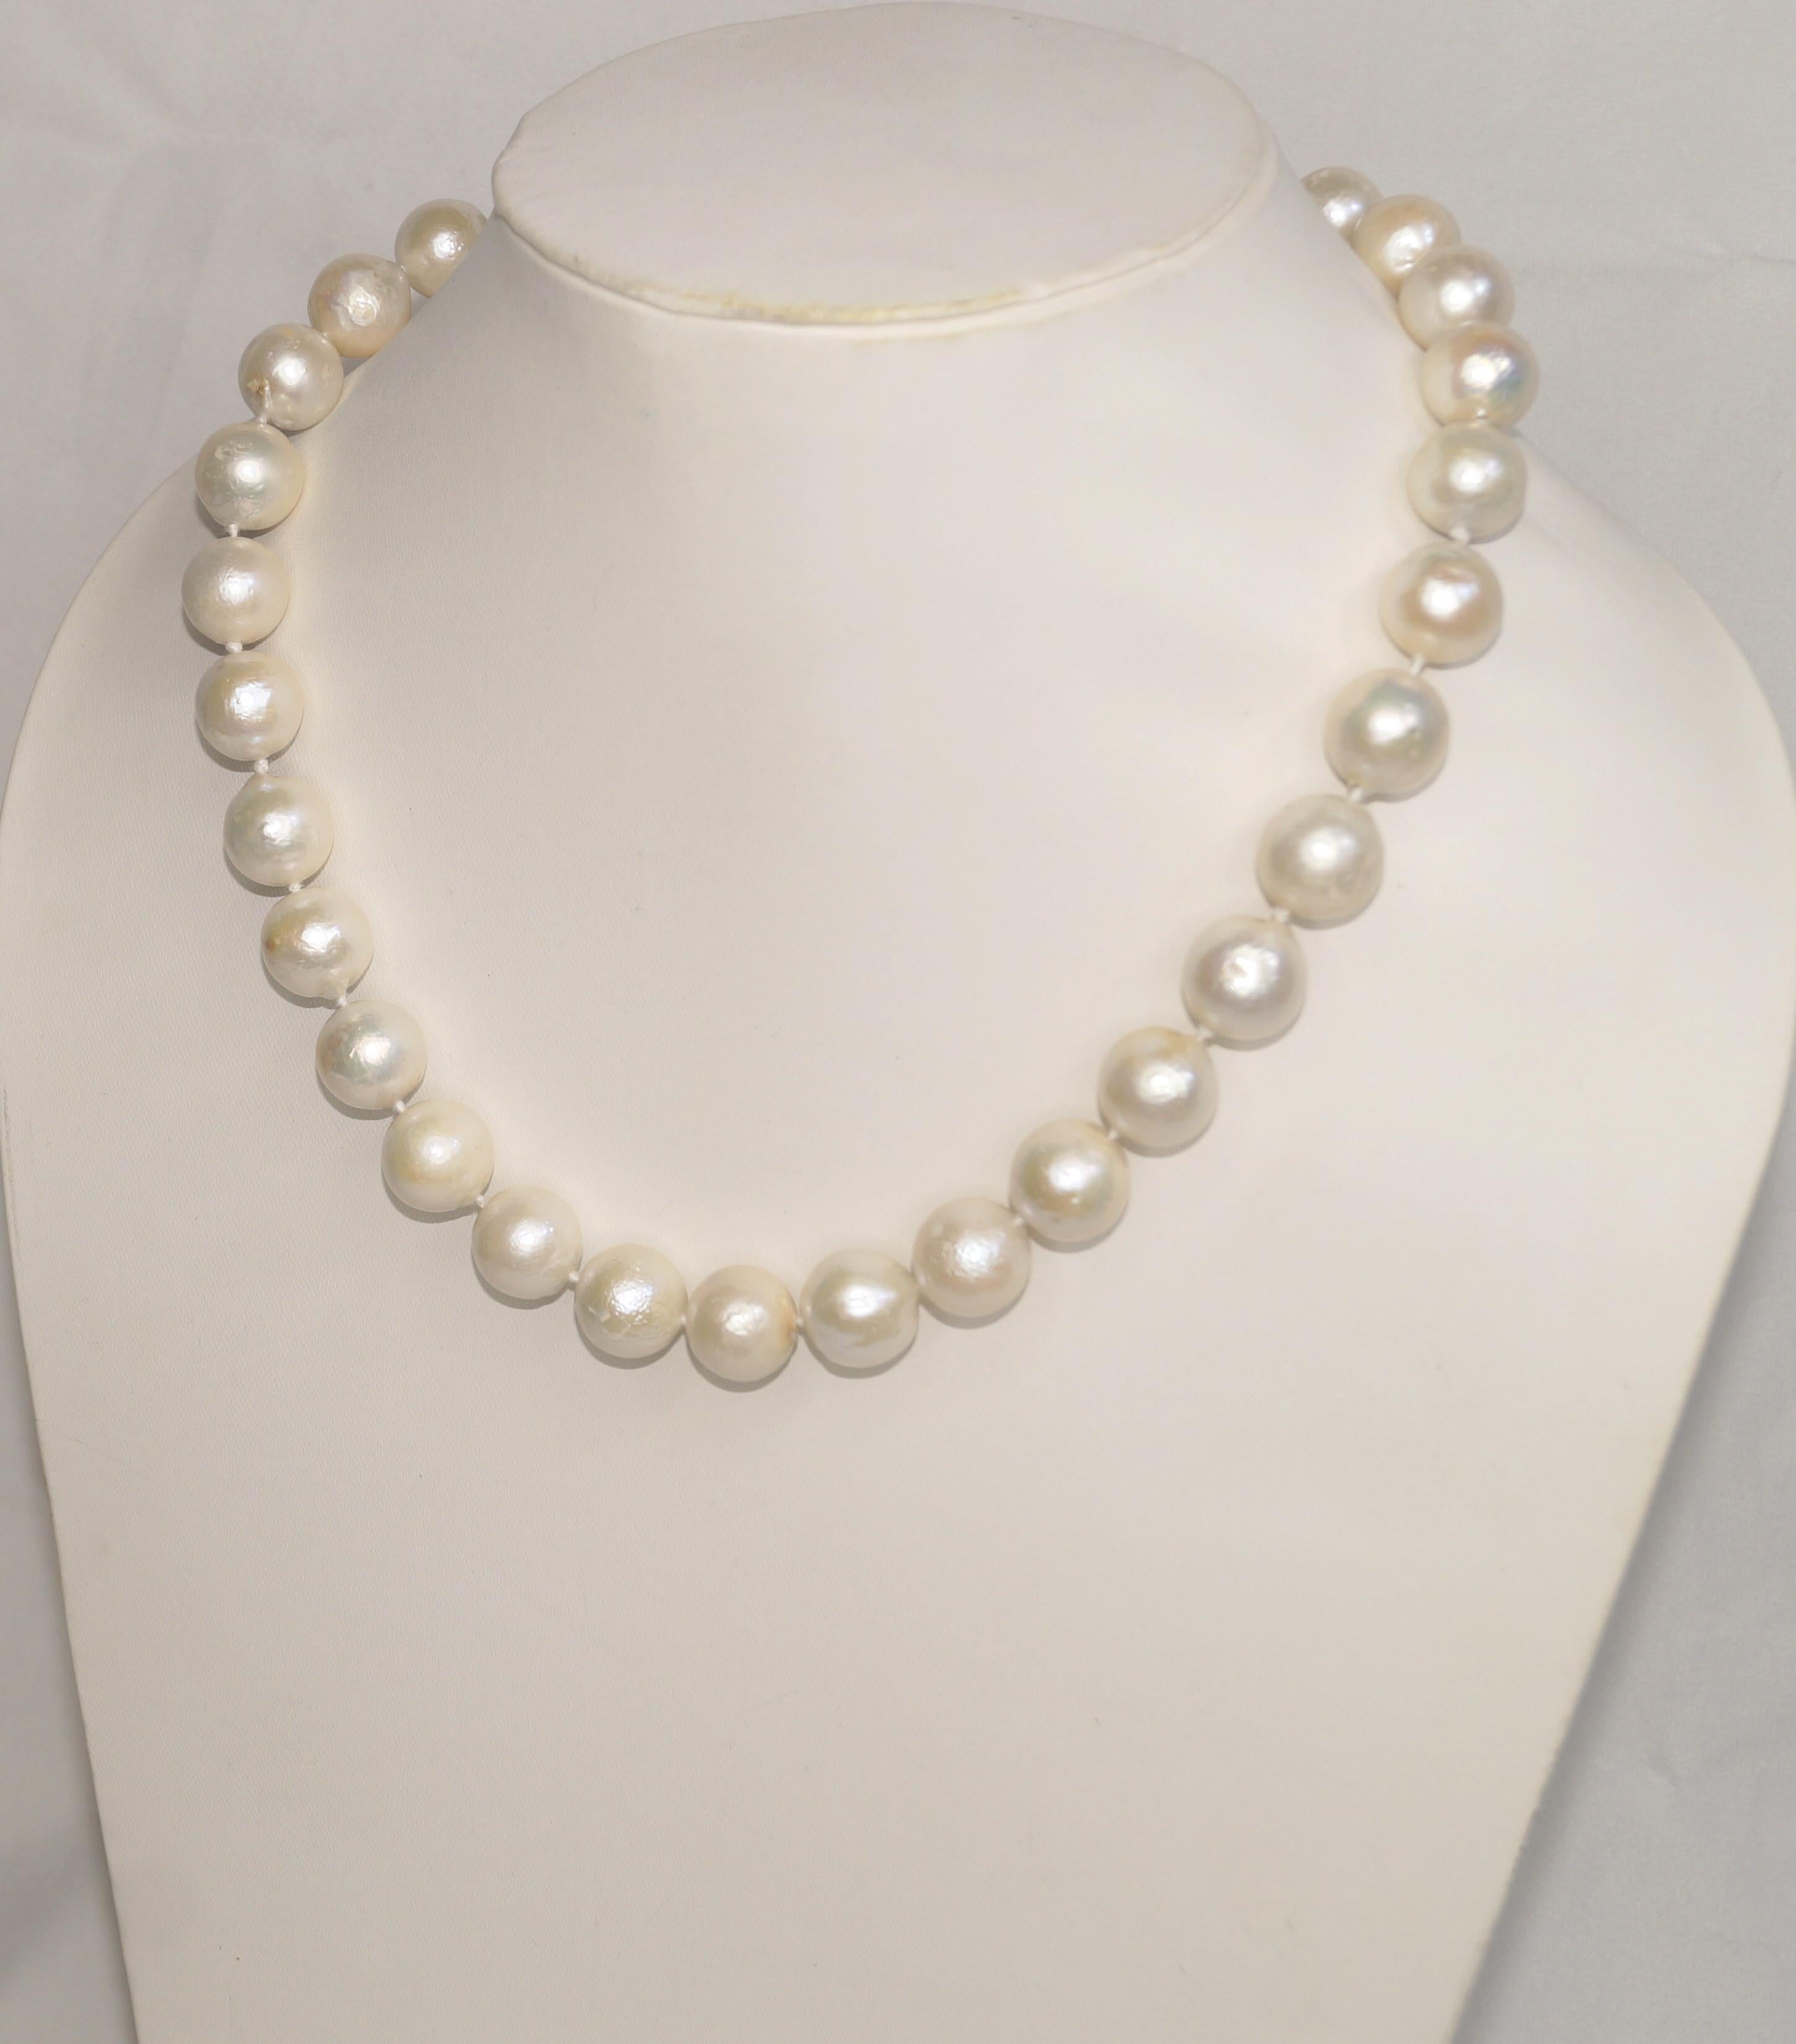 Details:
: 14k Yellow Gold Lock South Sea pearl beads Necklace.

: Item no- KM128/300

:Pearl Size: 12mmx15mm (Approx.)

:Necklace length: 21